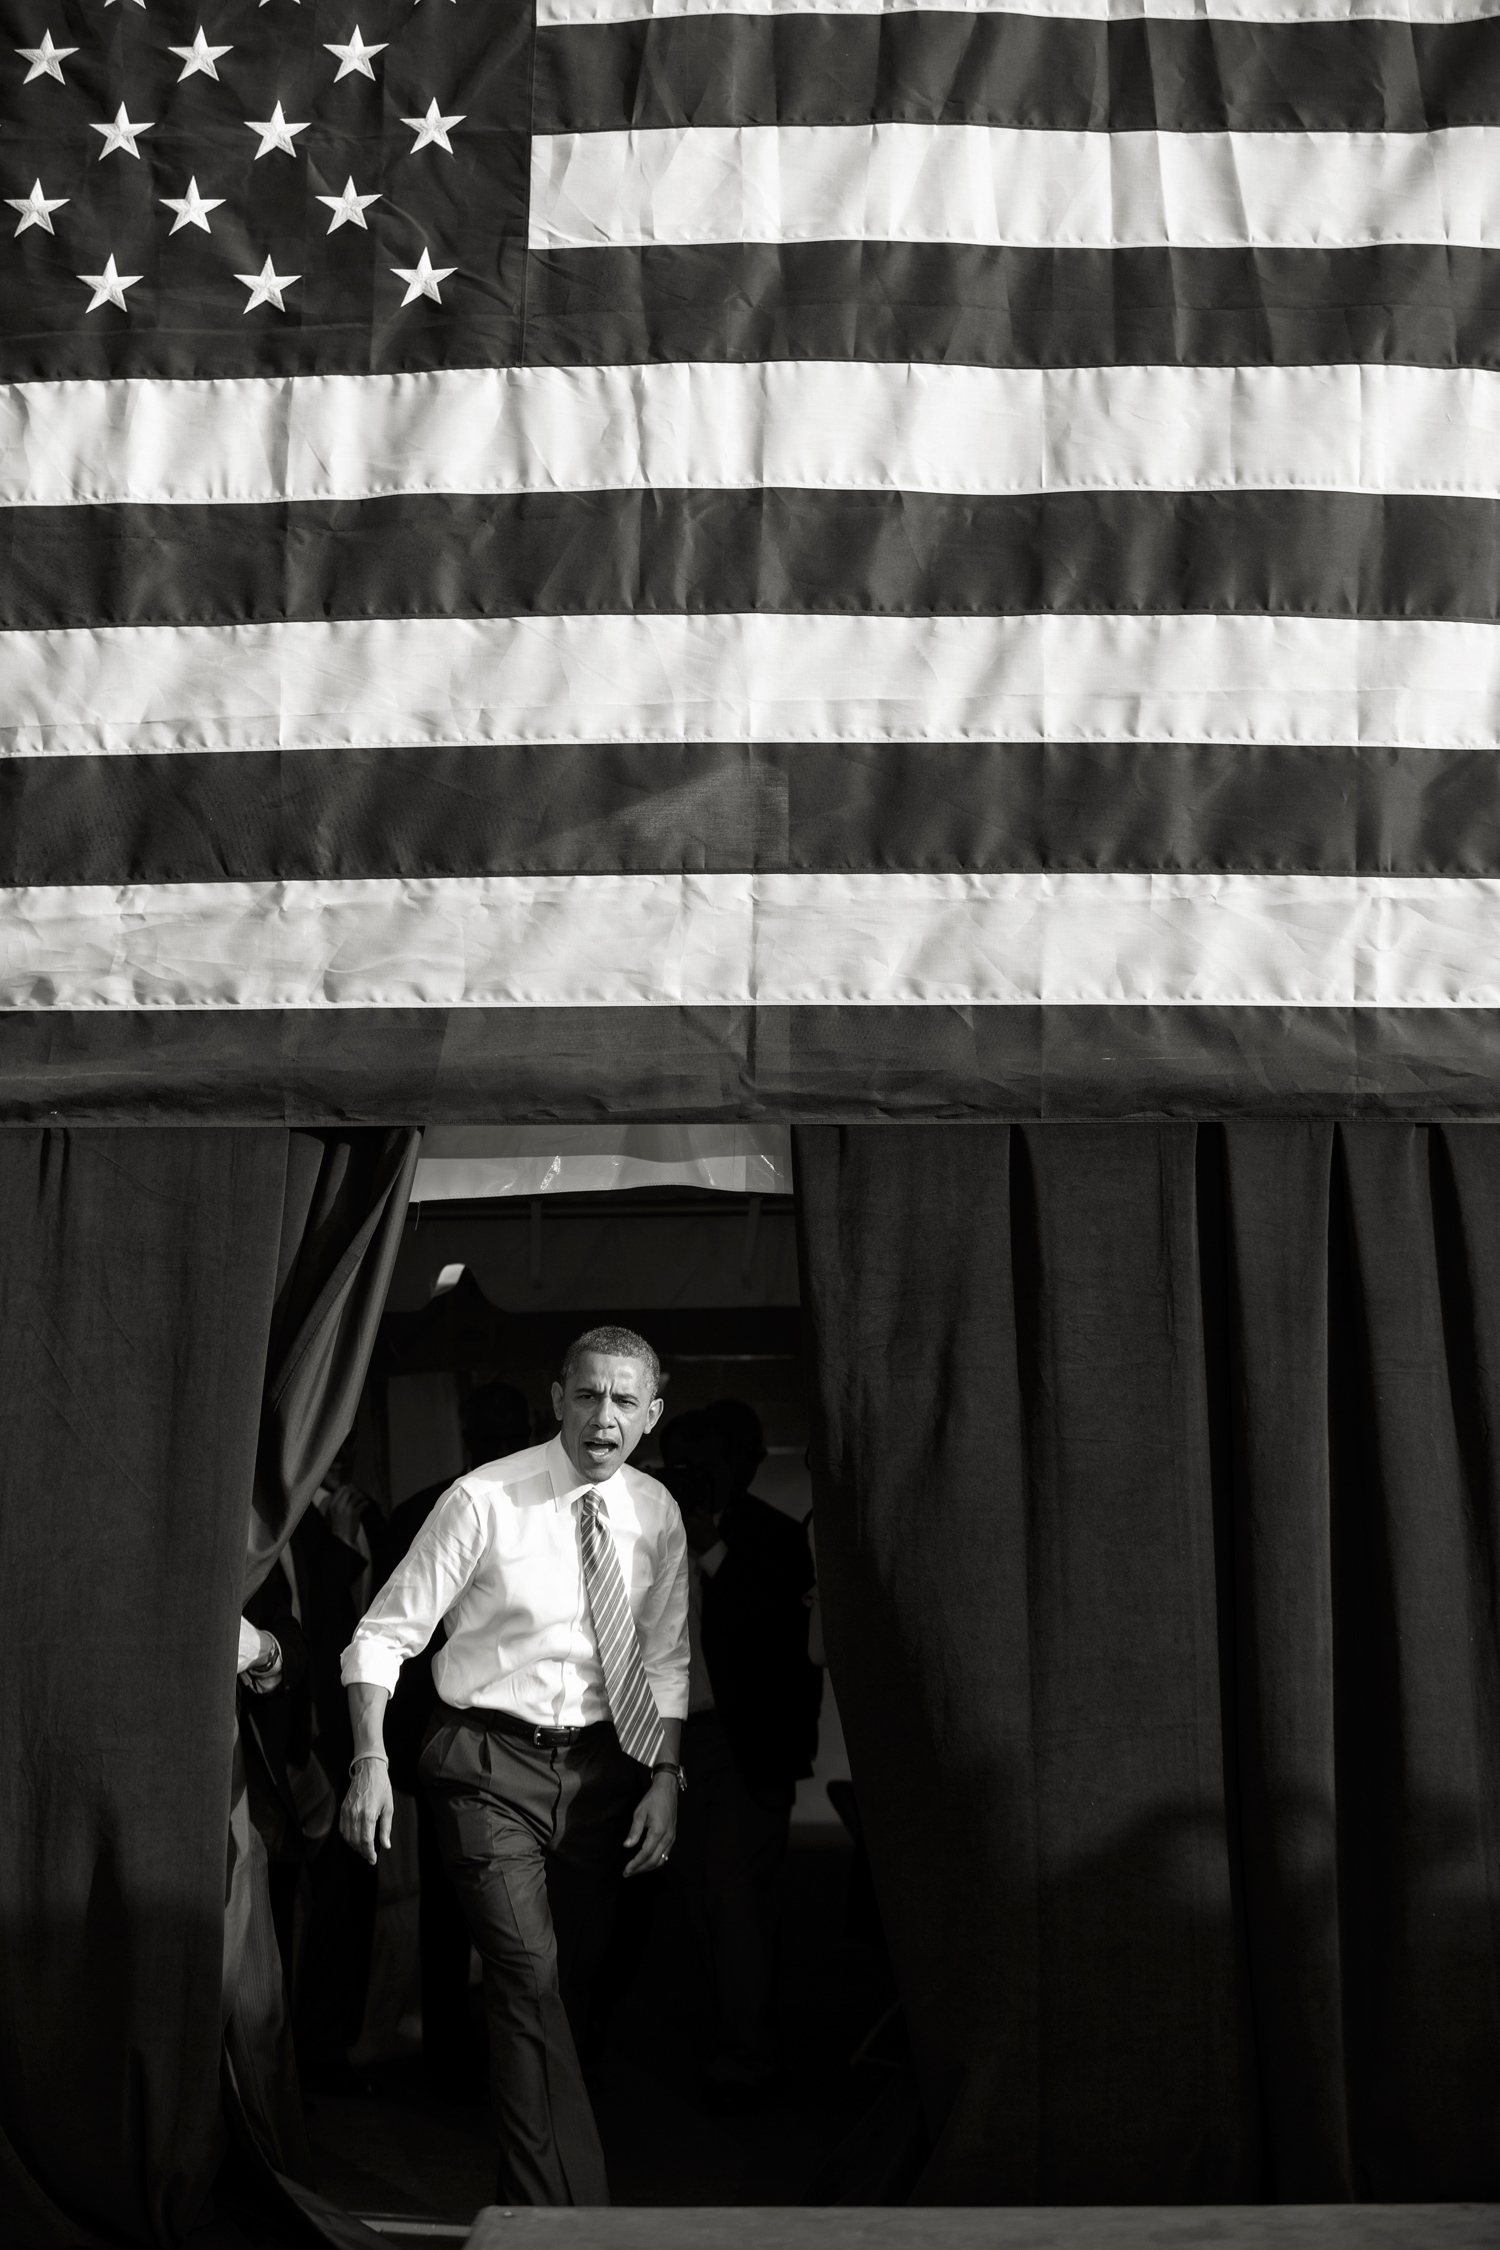 Image: President Obama attends a campaign rally in Tampa. Oct. 25, 2012.